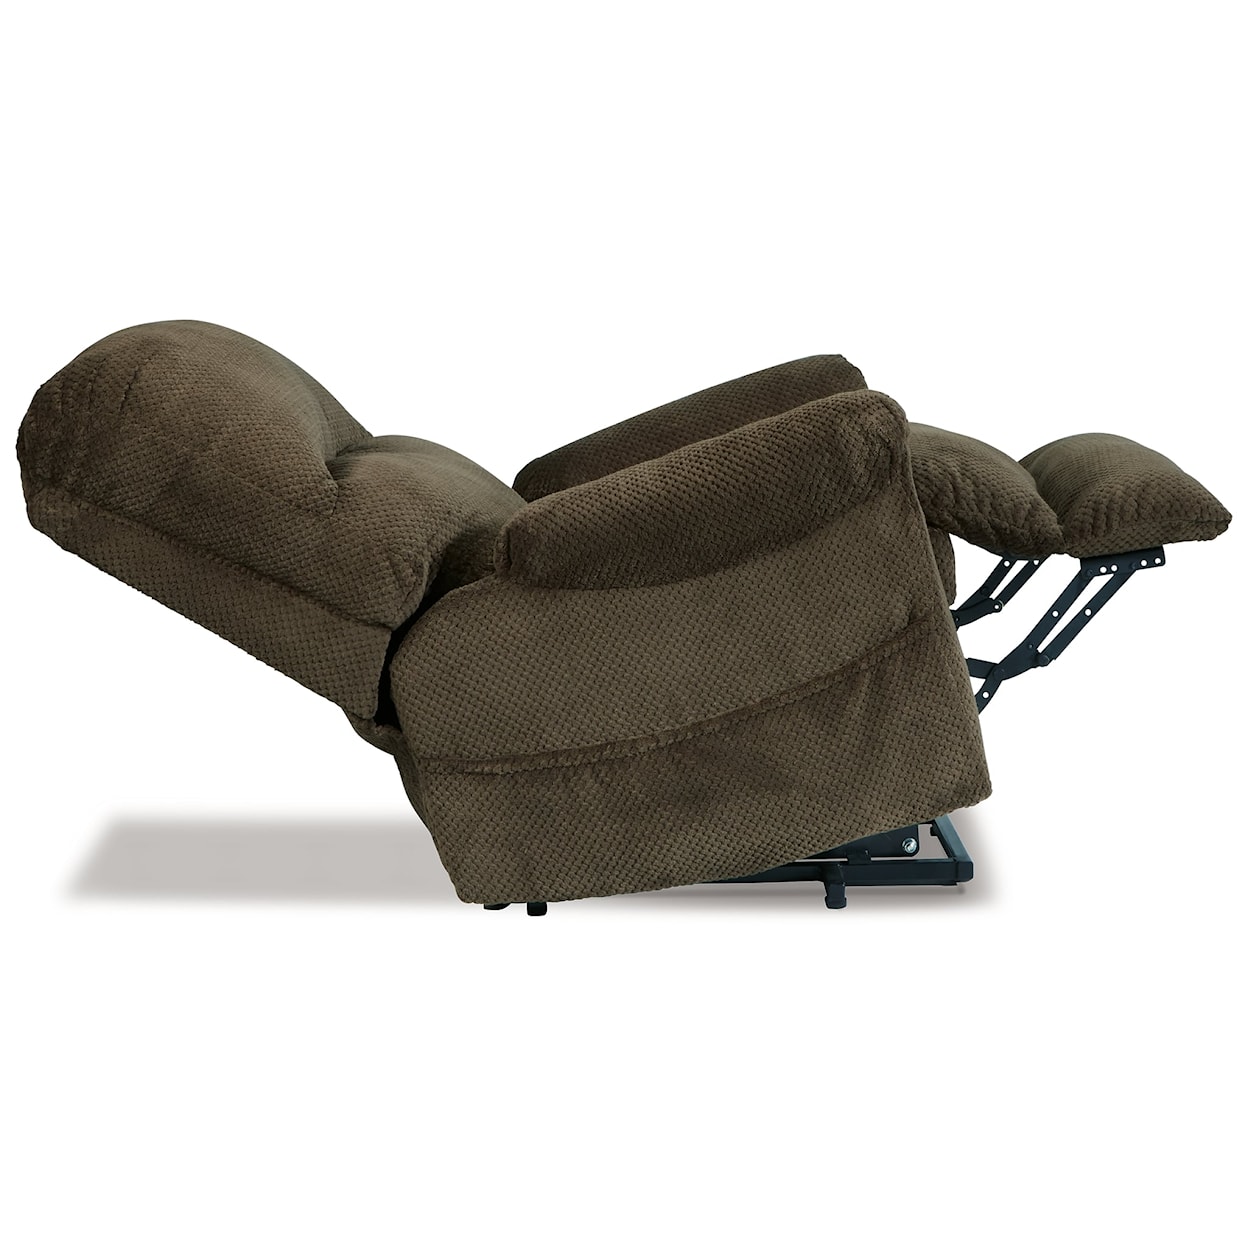 Signature Design by Ashley Shadowboxer Power Lift Recliner